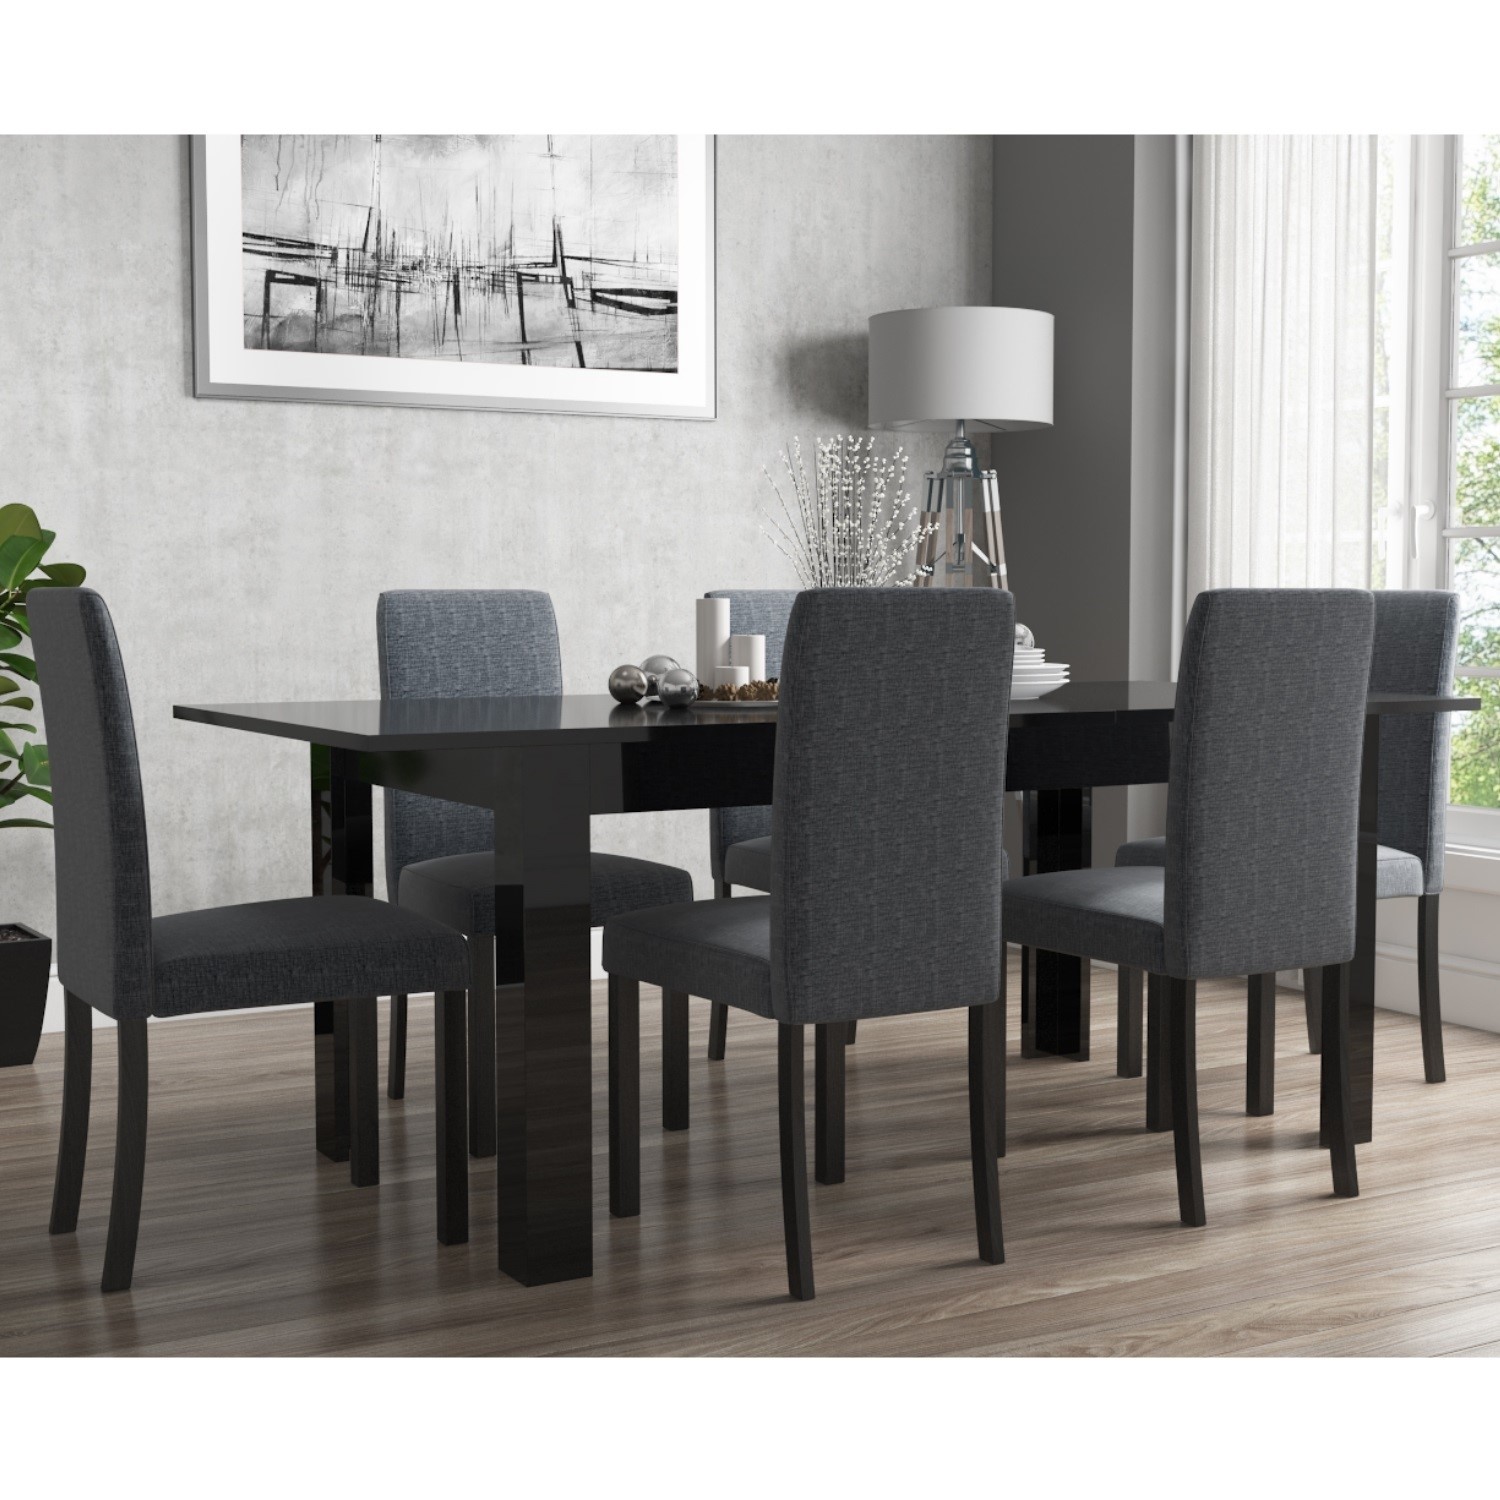 Extendable Dining Table In Black High Gloss With 6 Grey Chairs Vivienne New Haven Furniture123